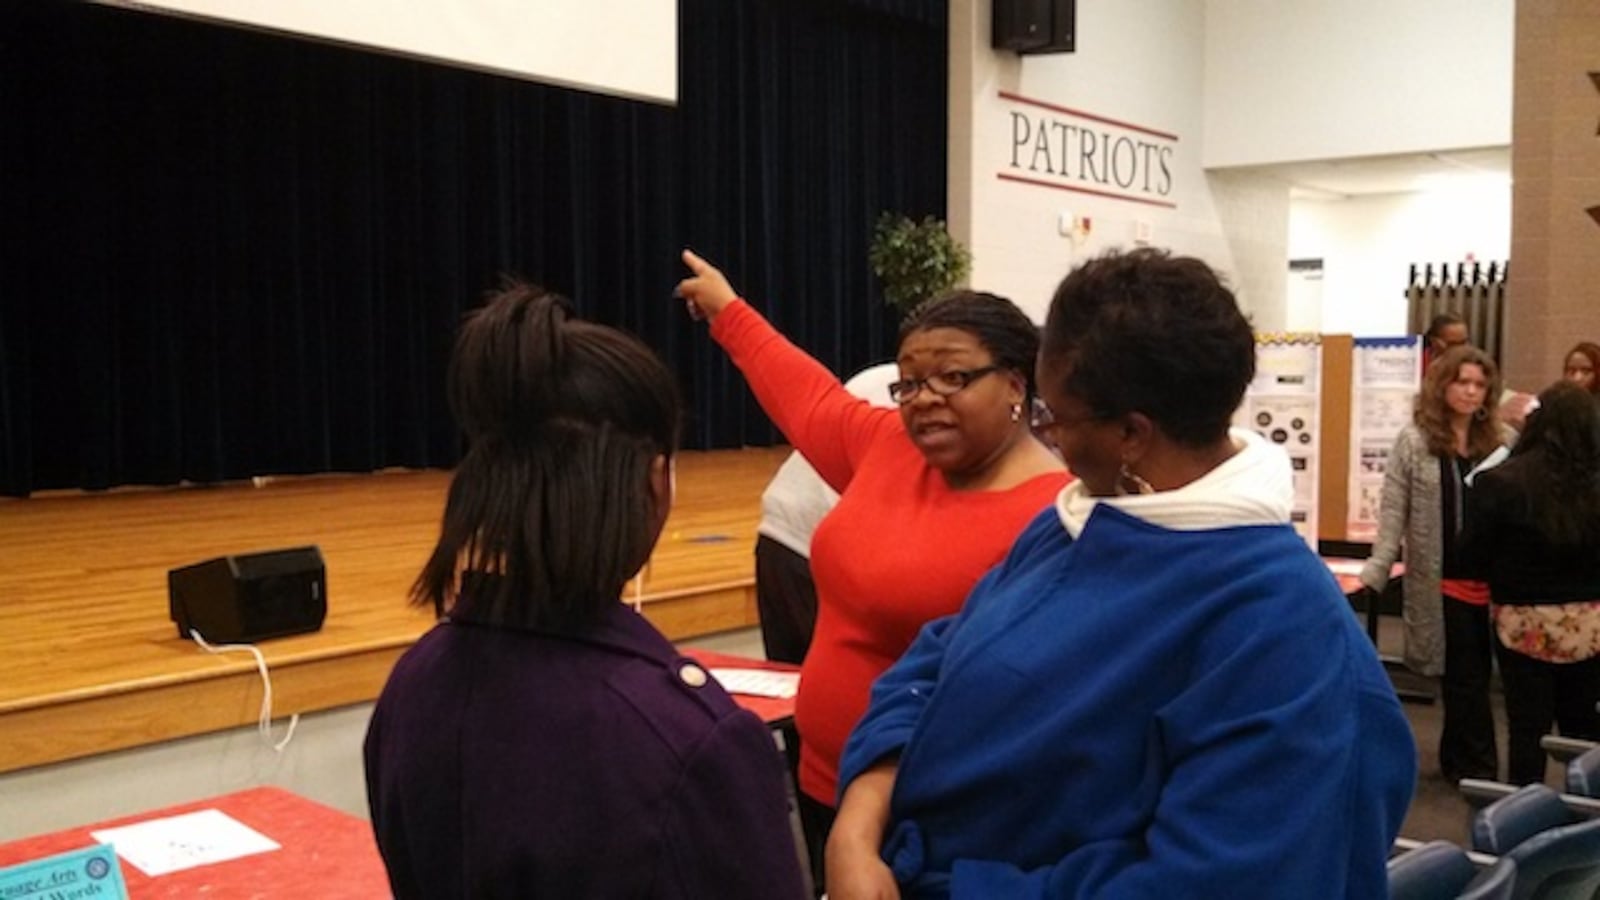 Colonial MIddle language arts teacher Patricia Hervey talks to student Ayante Williams and her mother, Sharon Kuykendall, about creative arts high school options.